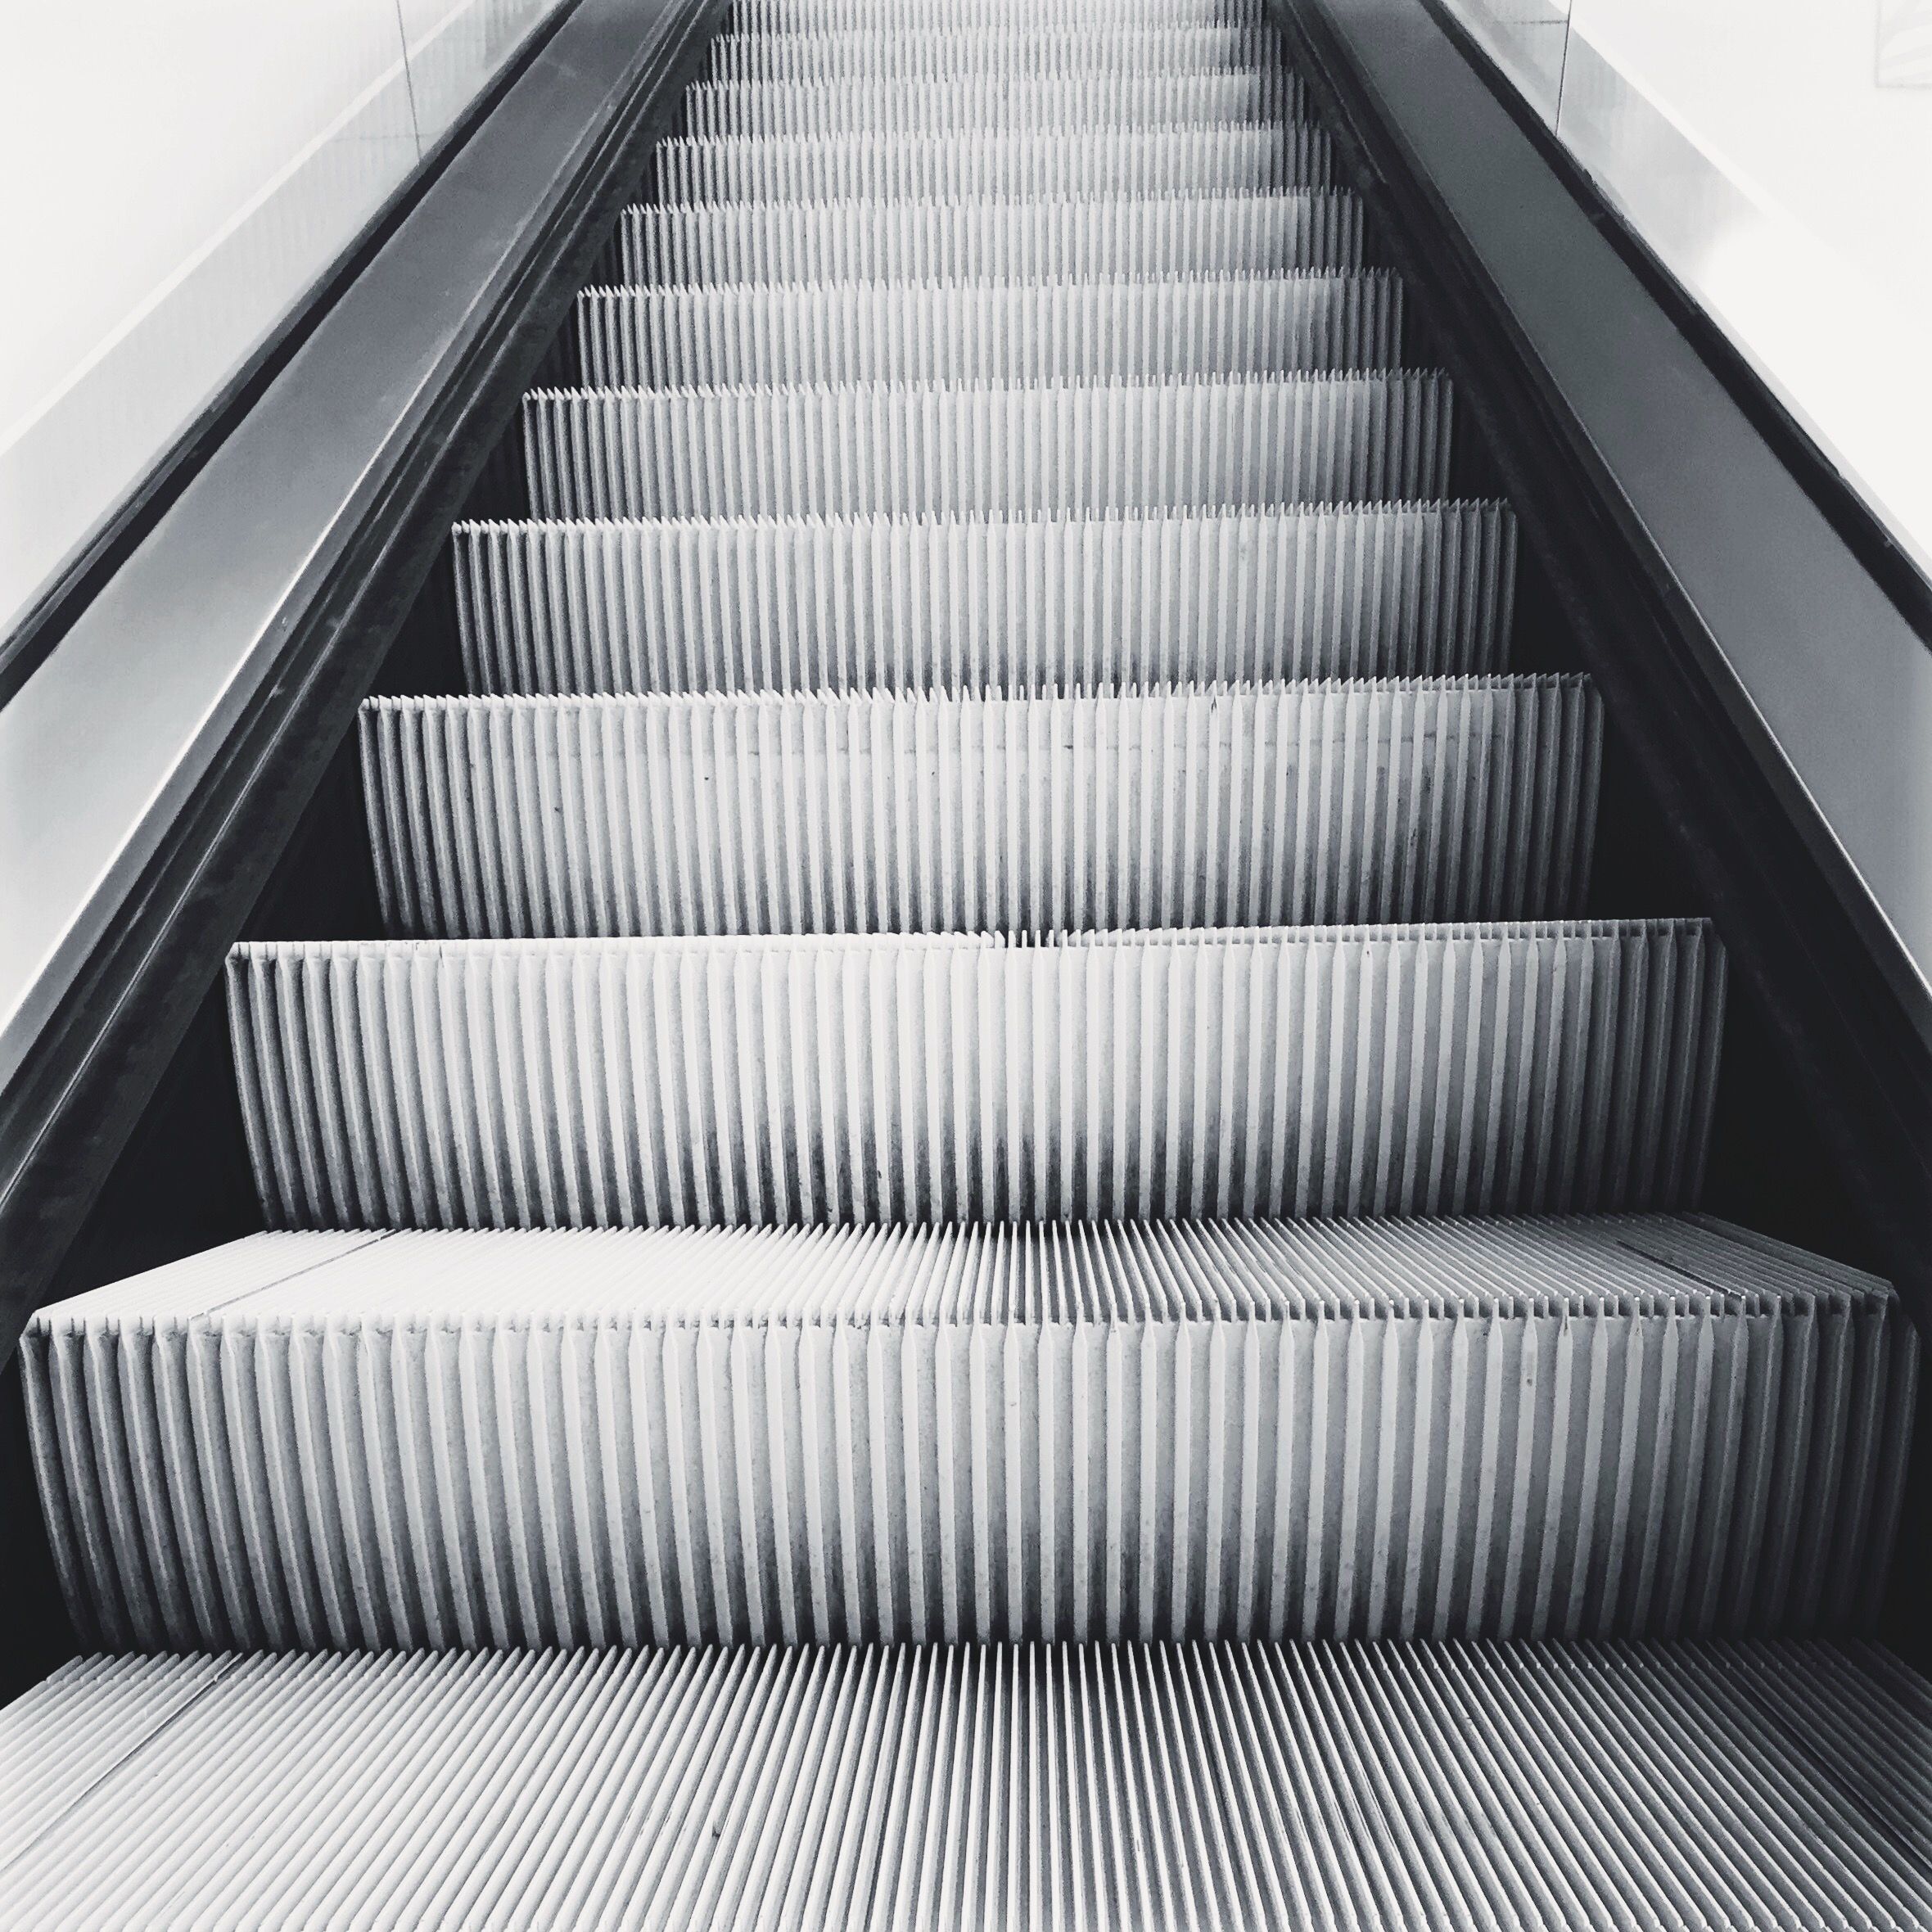 Movin' On Up: The Curious Birth and Rapid Rise of the Escalator